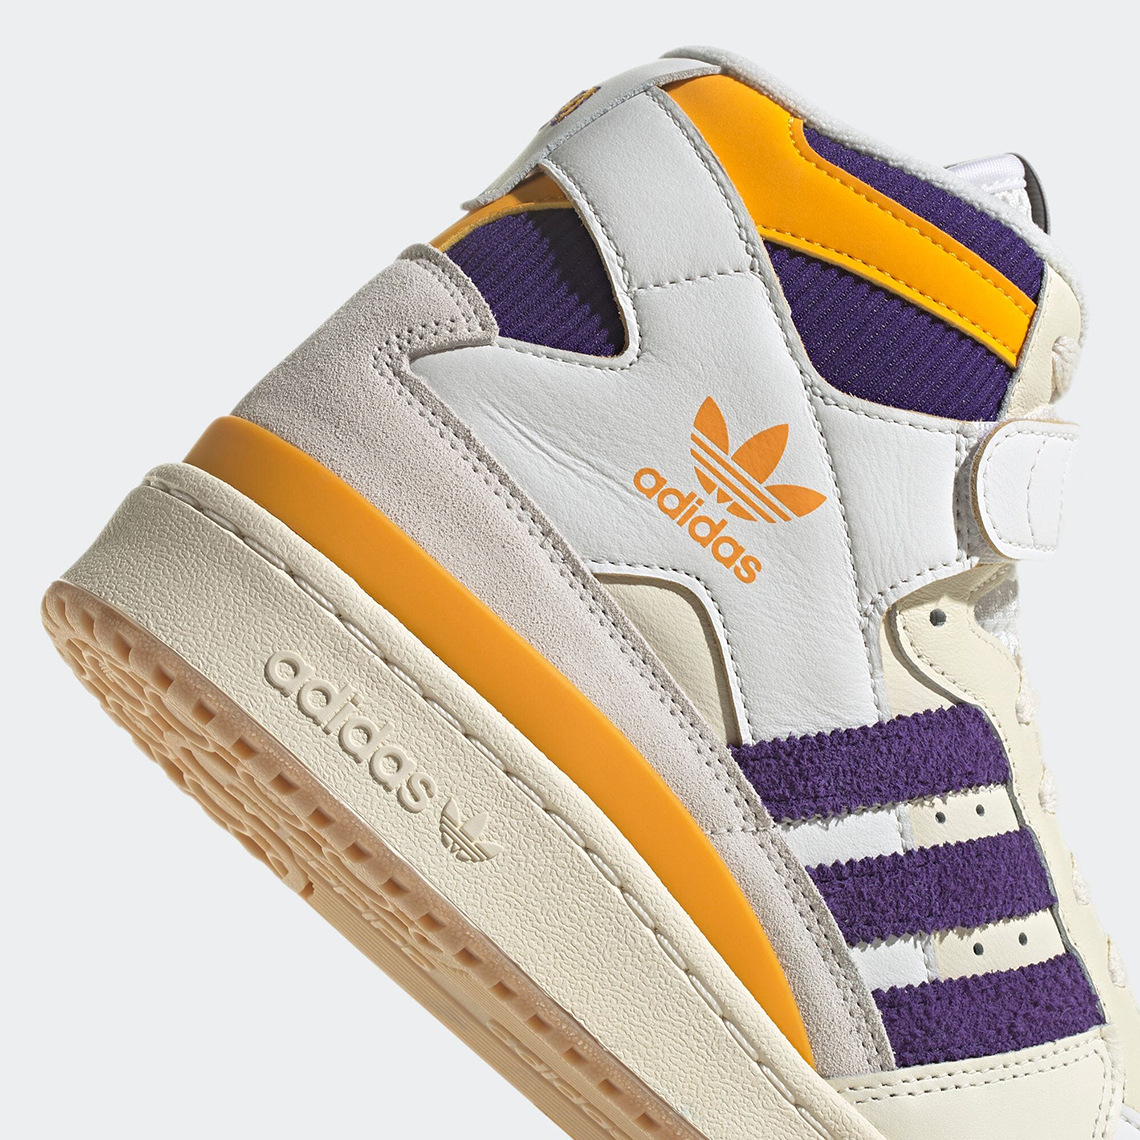 adidas Forum 84 High Lakers